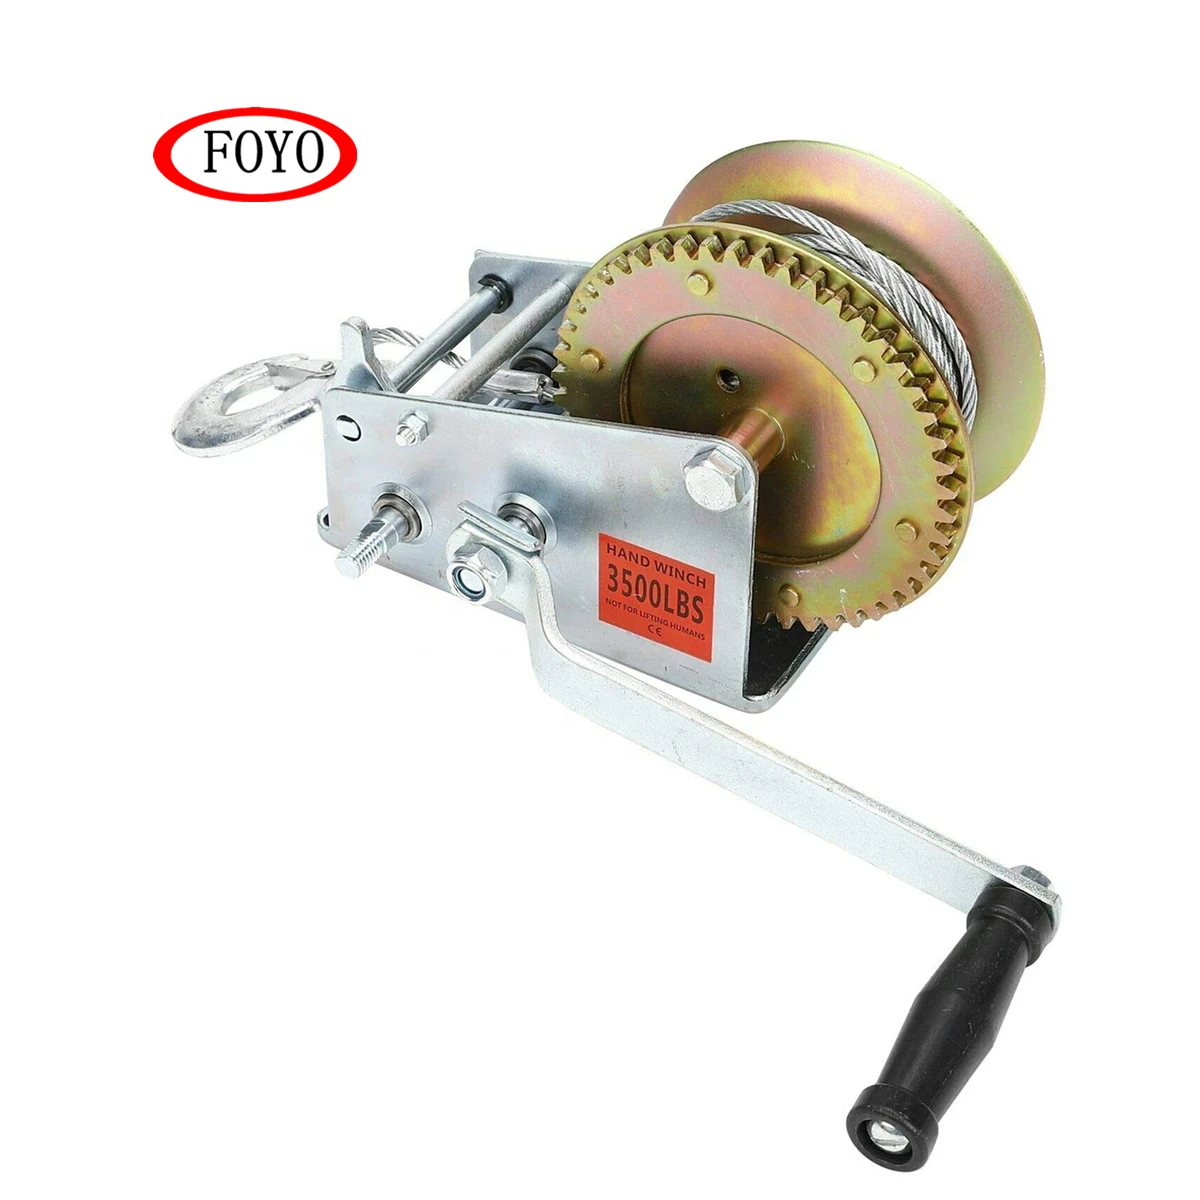 FOYO Brand Boat Trailer Winch with Cable Portable Hand Winch Handle Crank Winch With factory Price